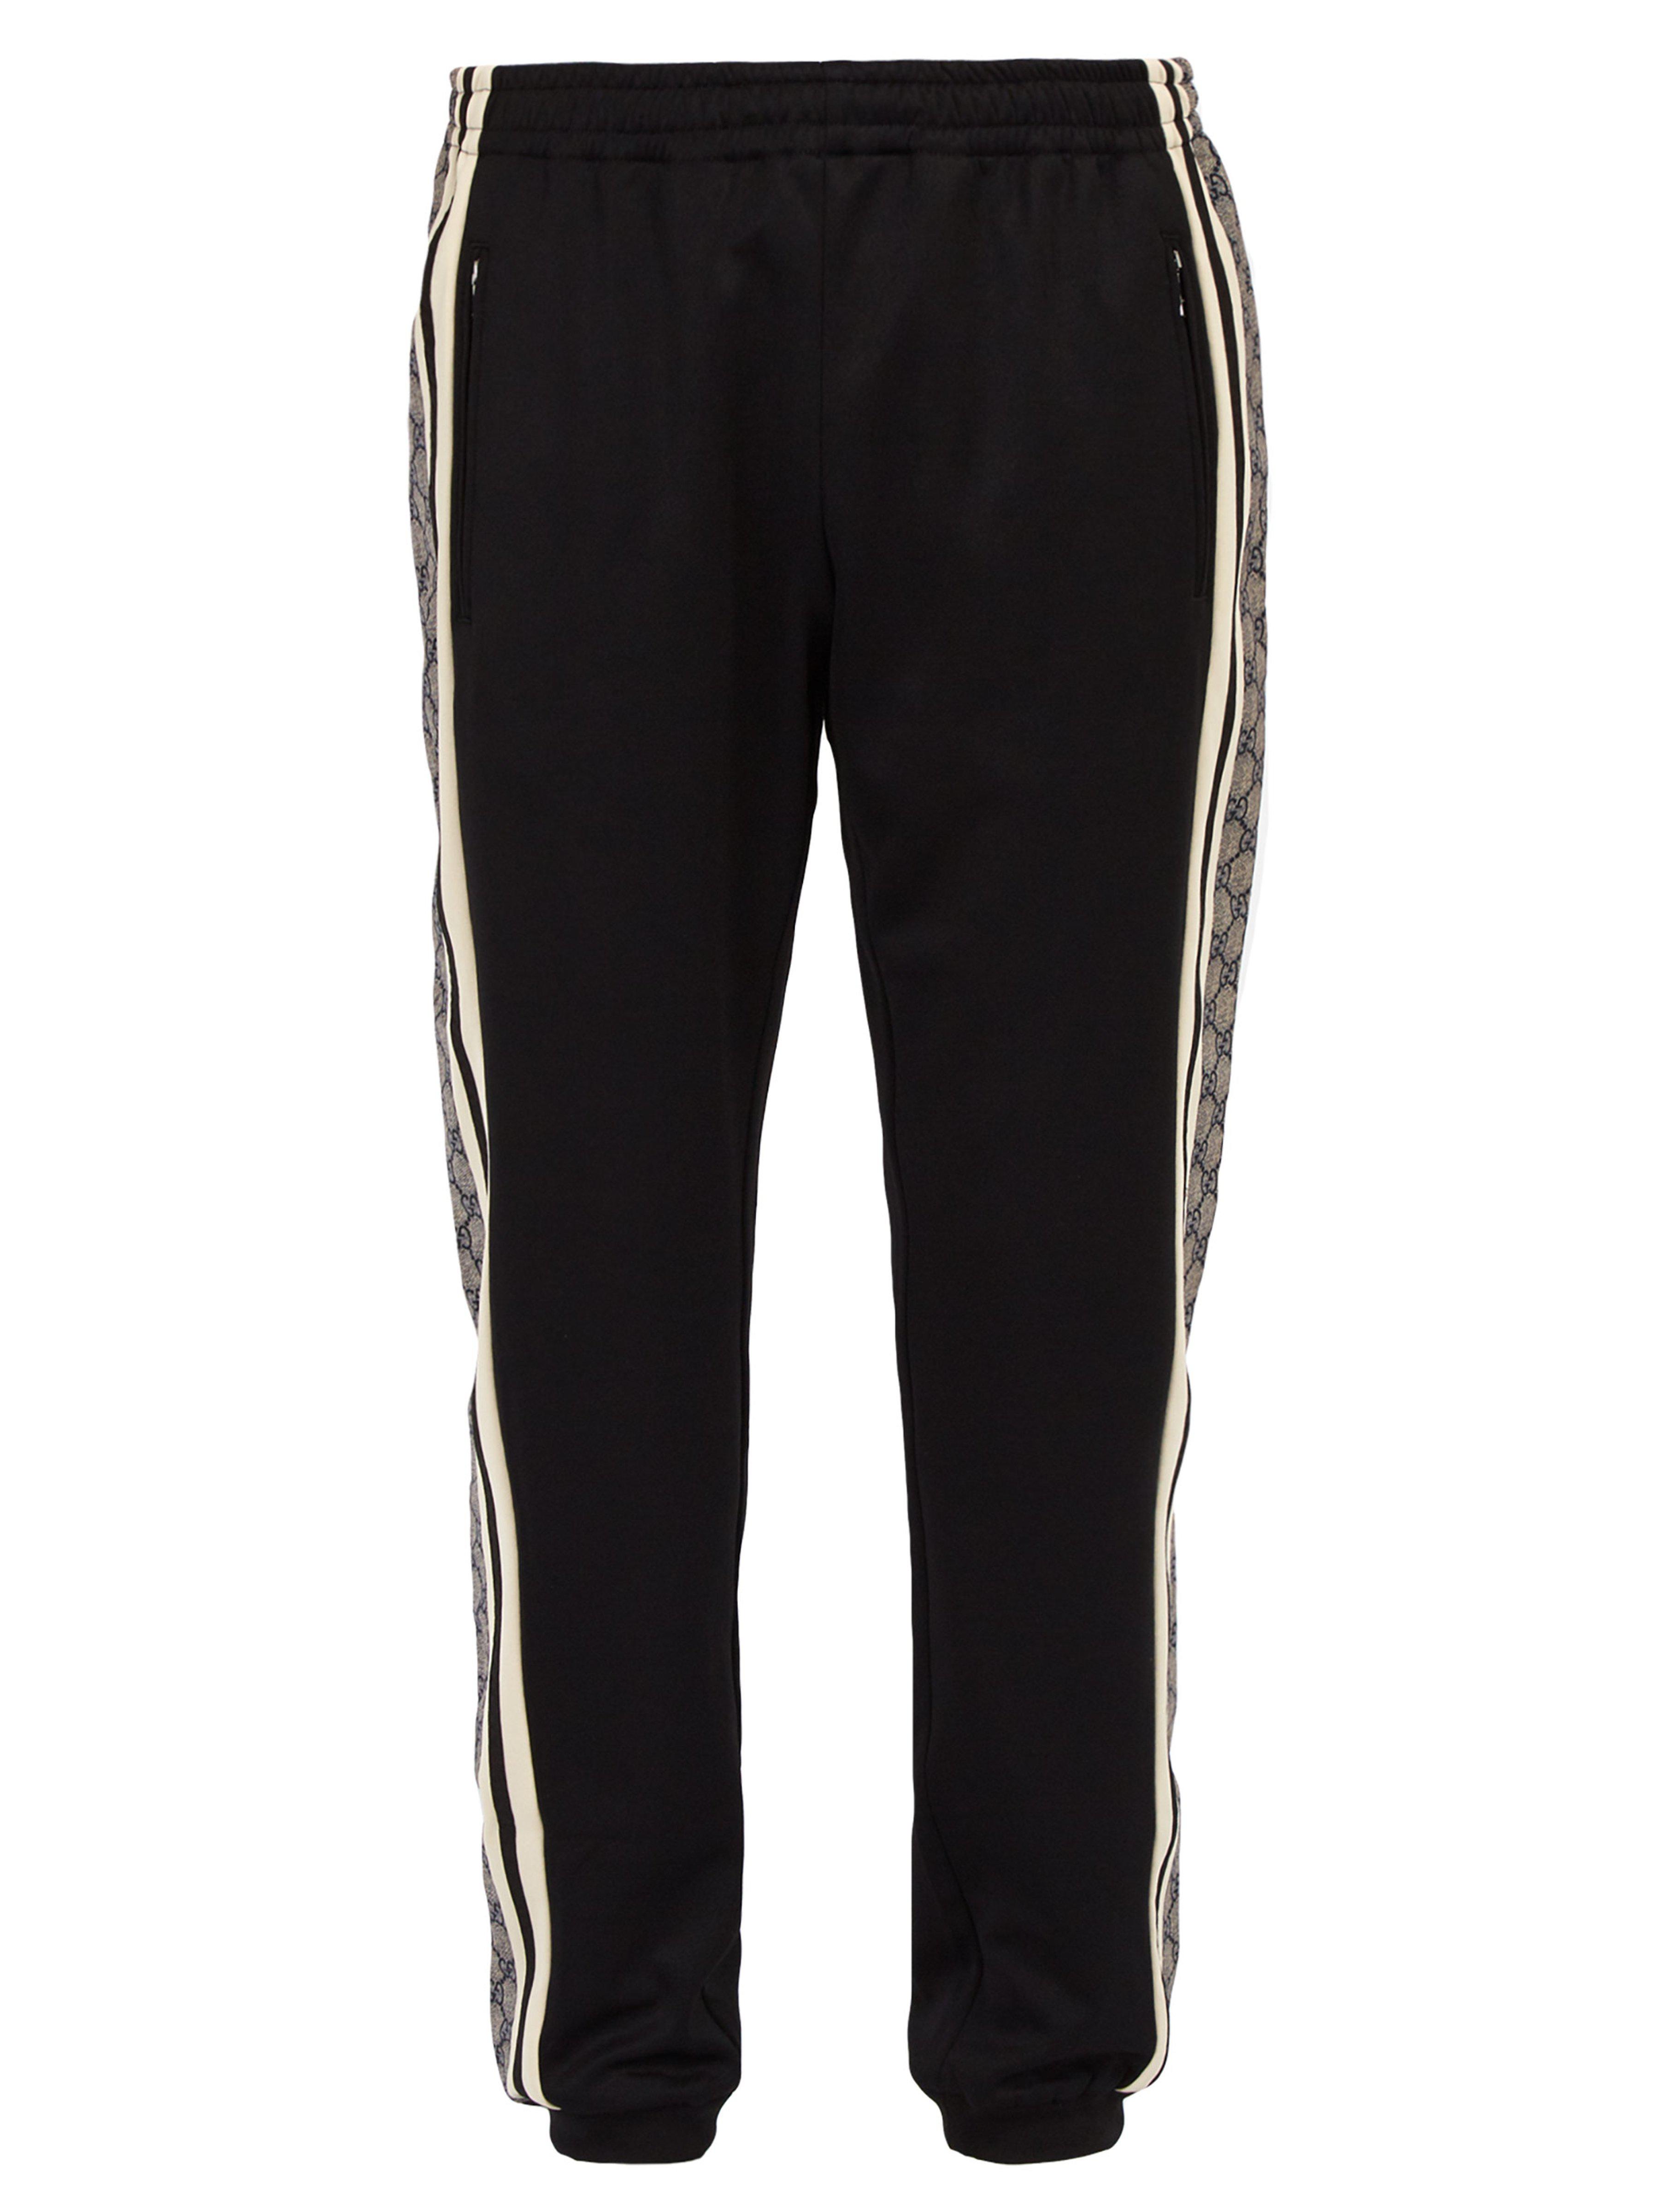 Gucci Gg Logo Track Pants in Black for Men - Lyst